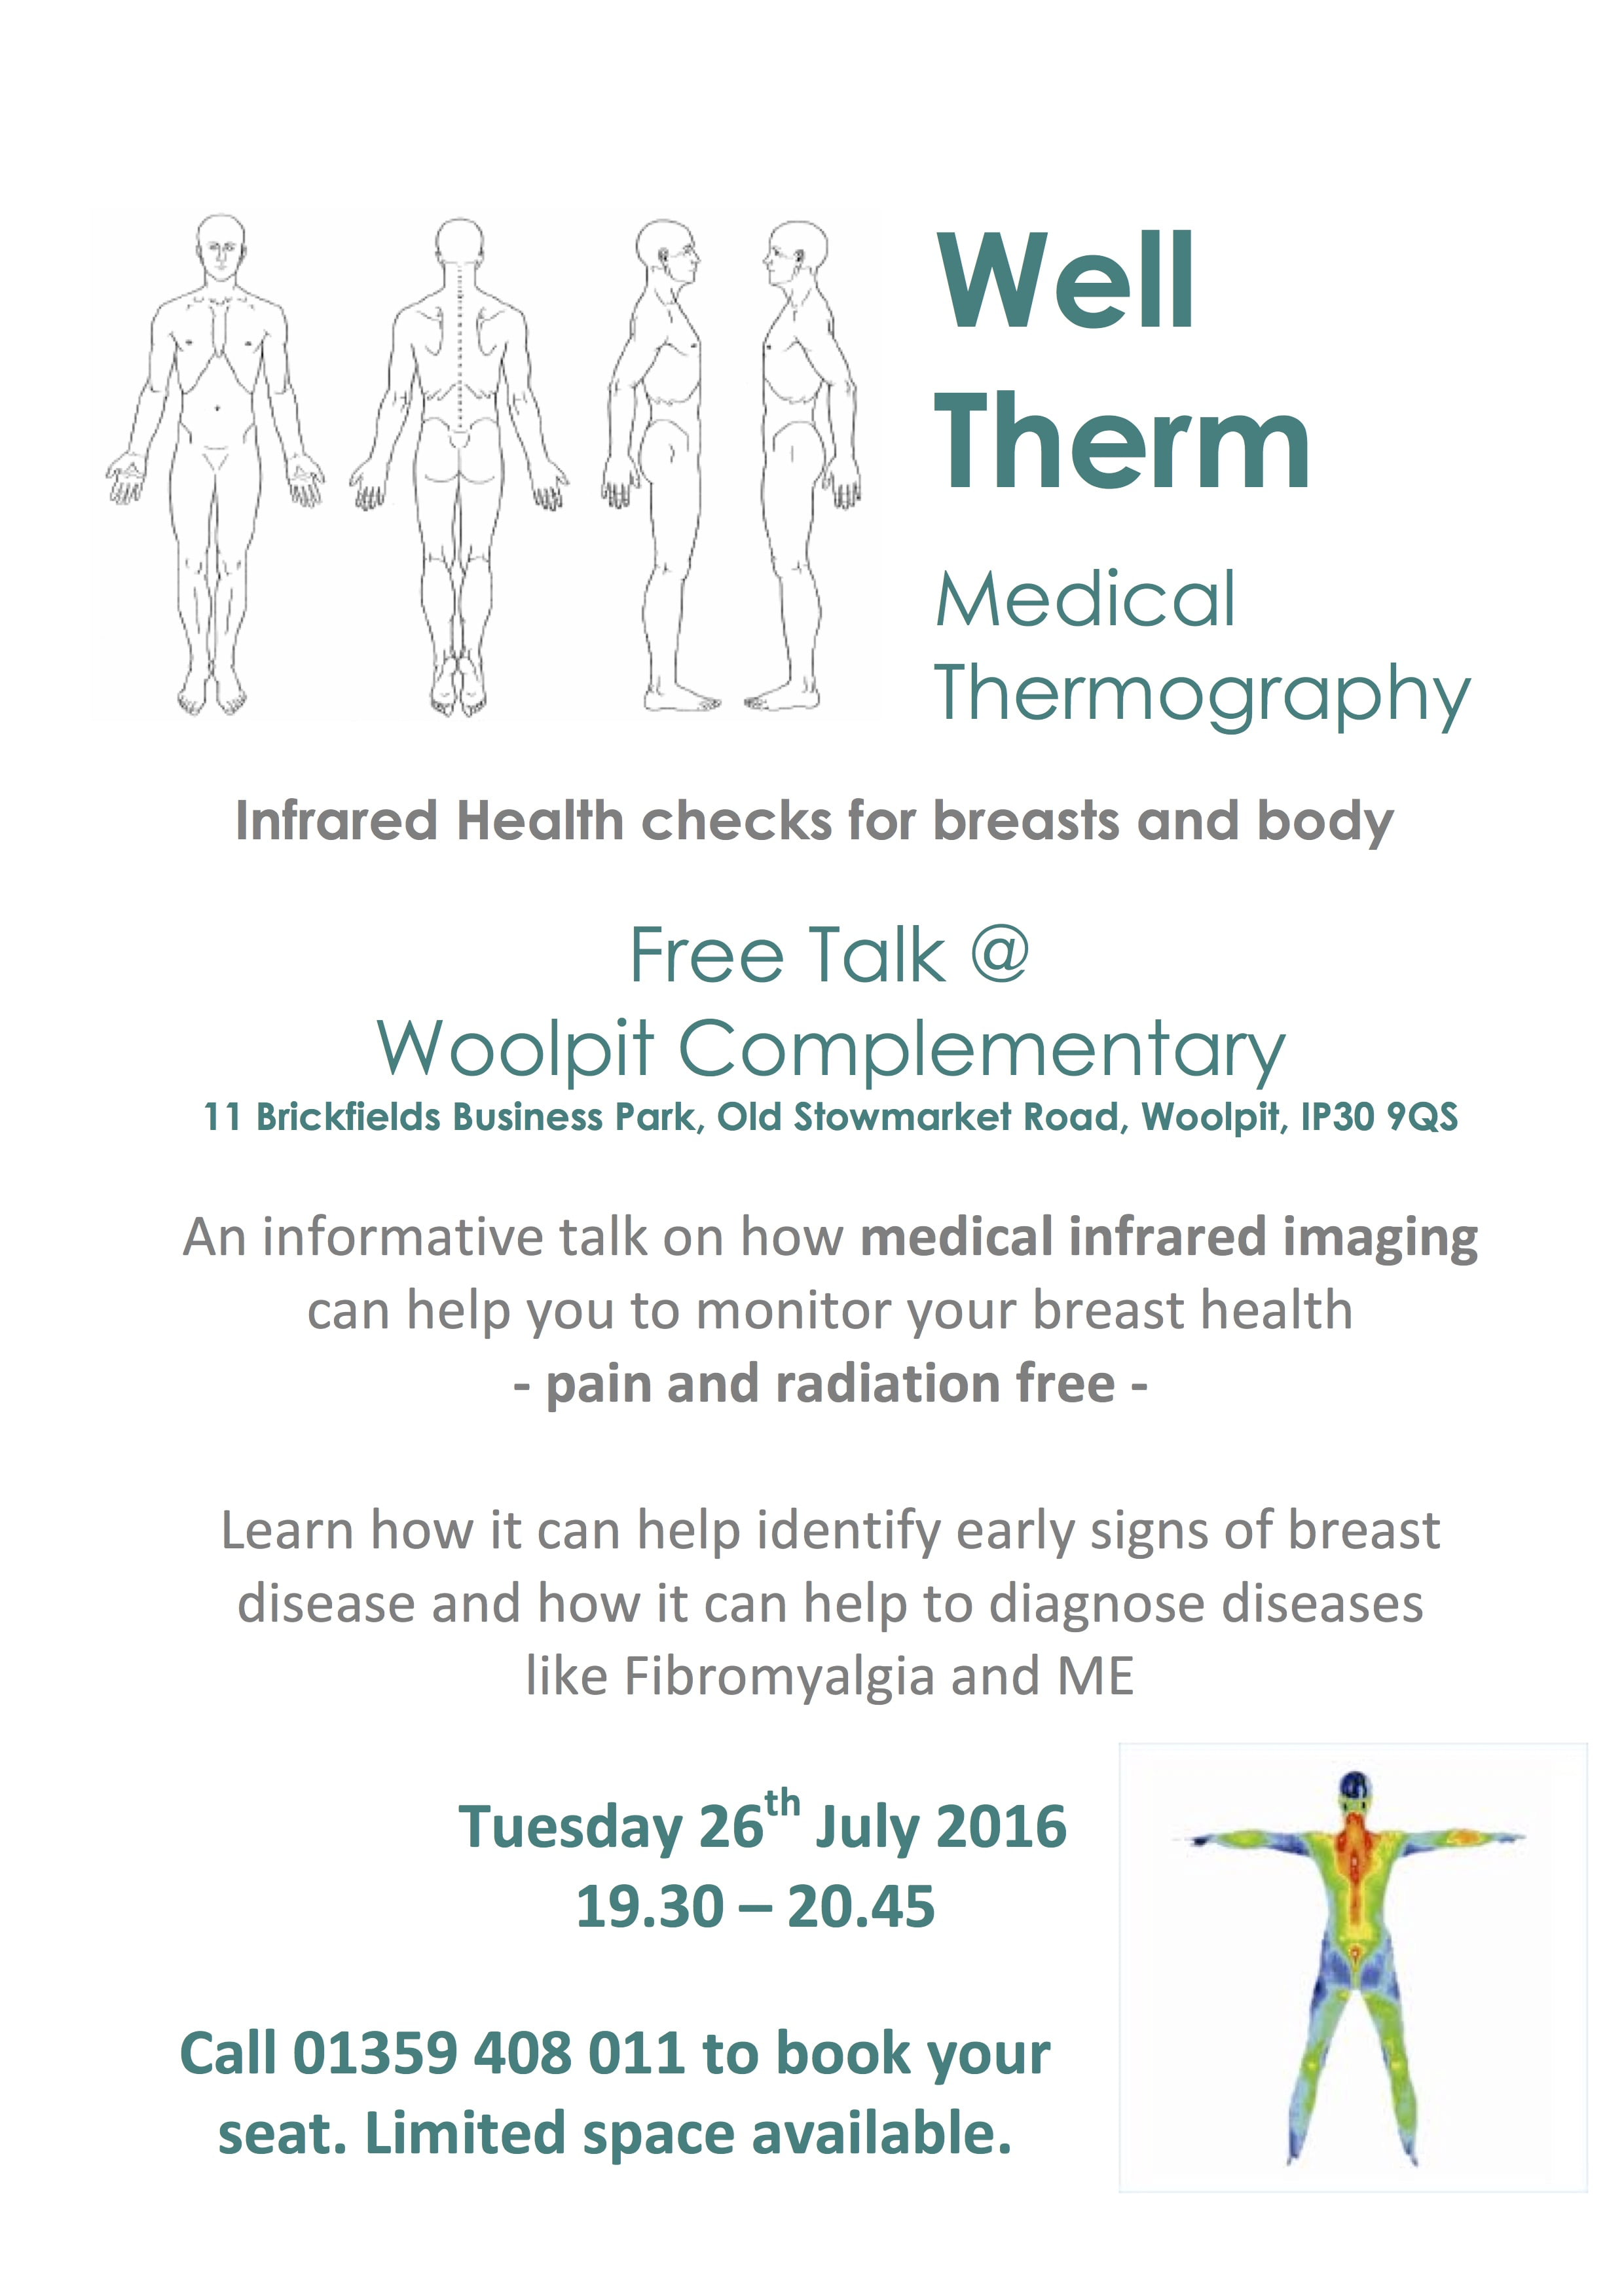 Medical Thermography - Woolpit Complementary